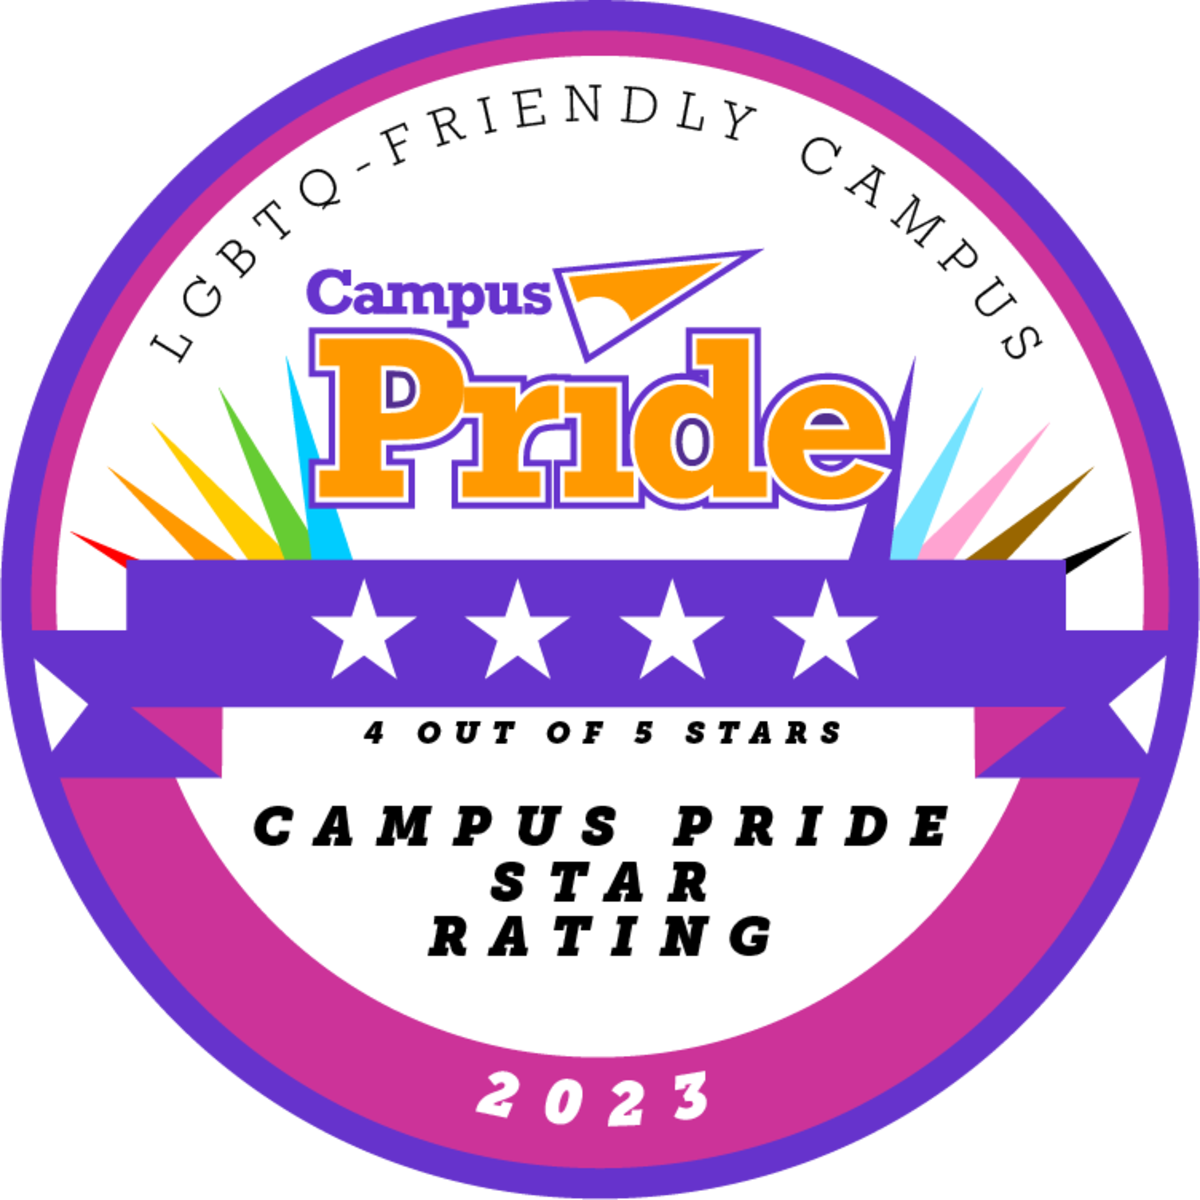 Photo of the Campus Pride rating sticker